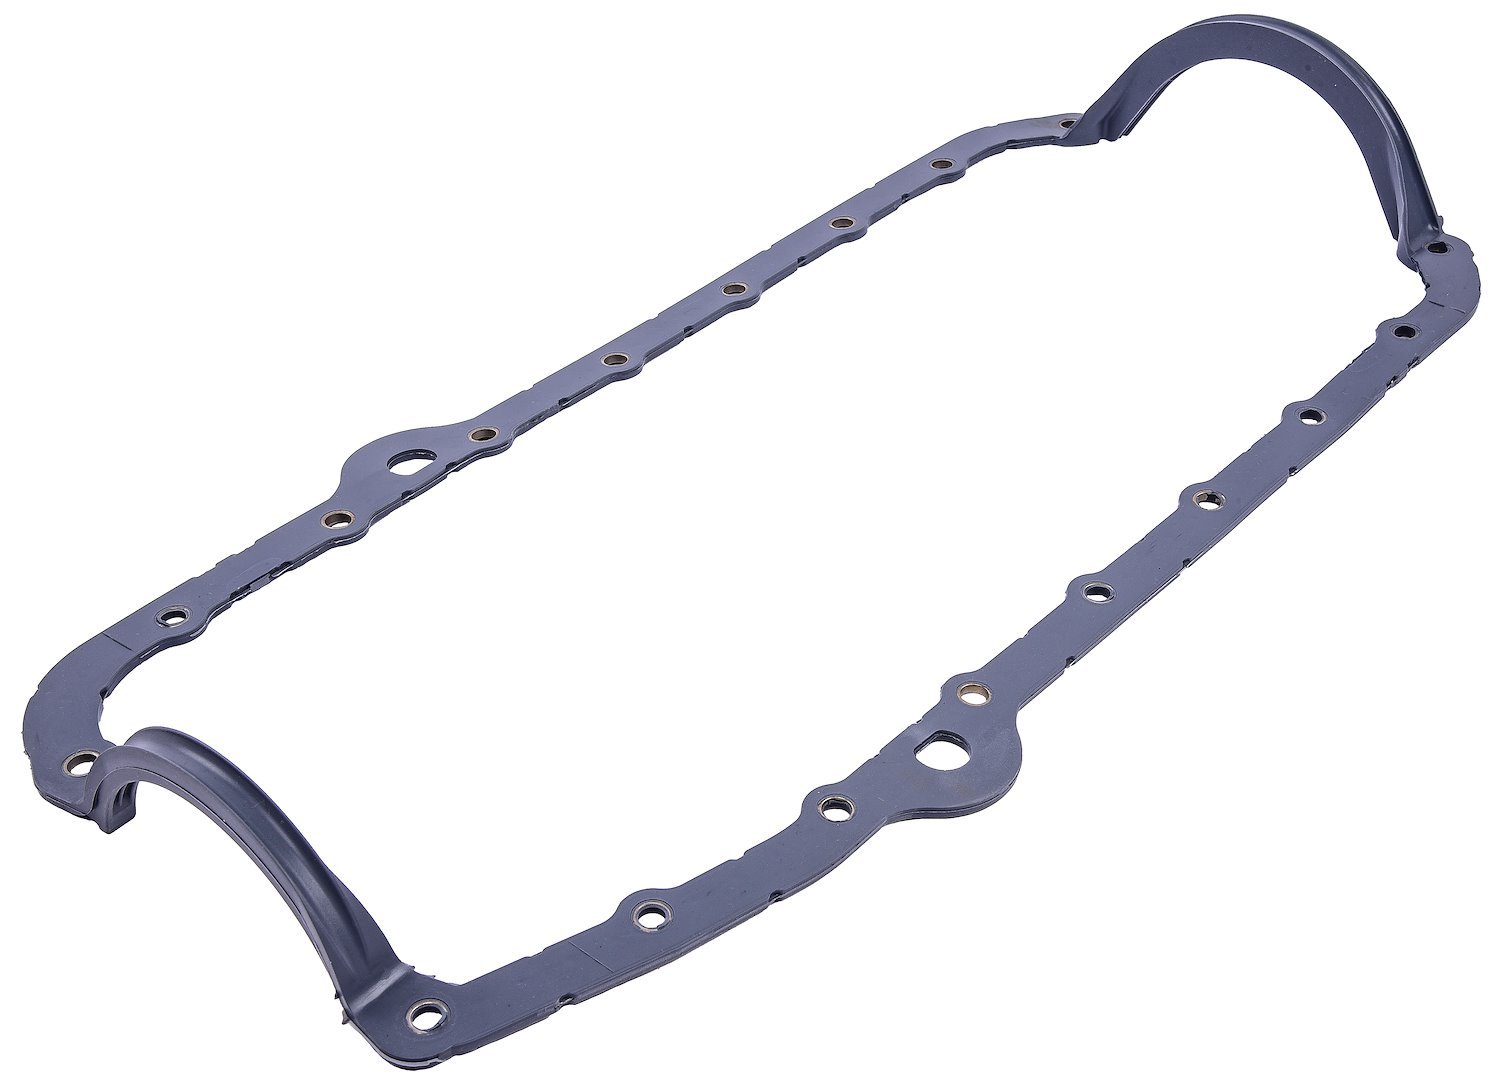 Oil Pan Gasket for 1975-1979 Small Block Chevy [One Piece Design]